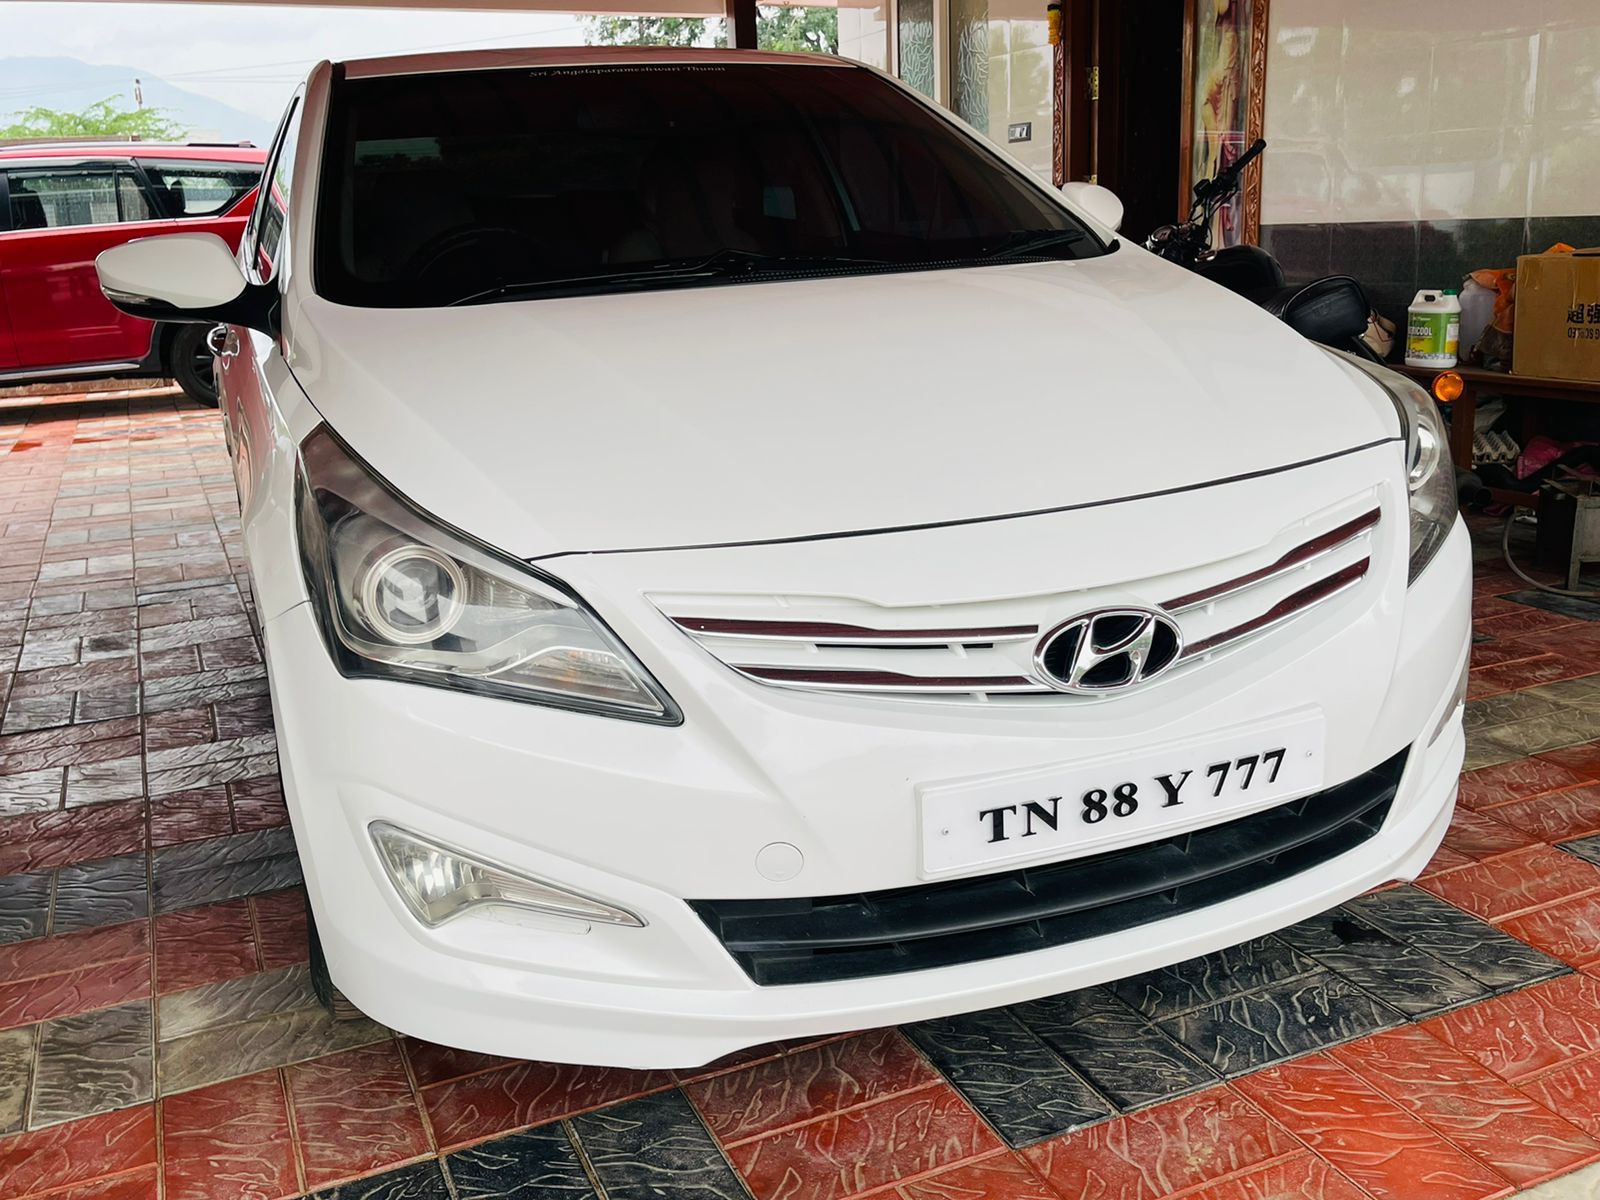 3919-for-sale-Hyundai-Verna-Fluidic-Diesel-First-Owner-2016-TN-registered-rs-750000